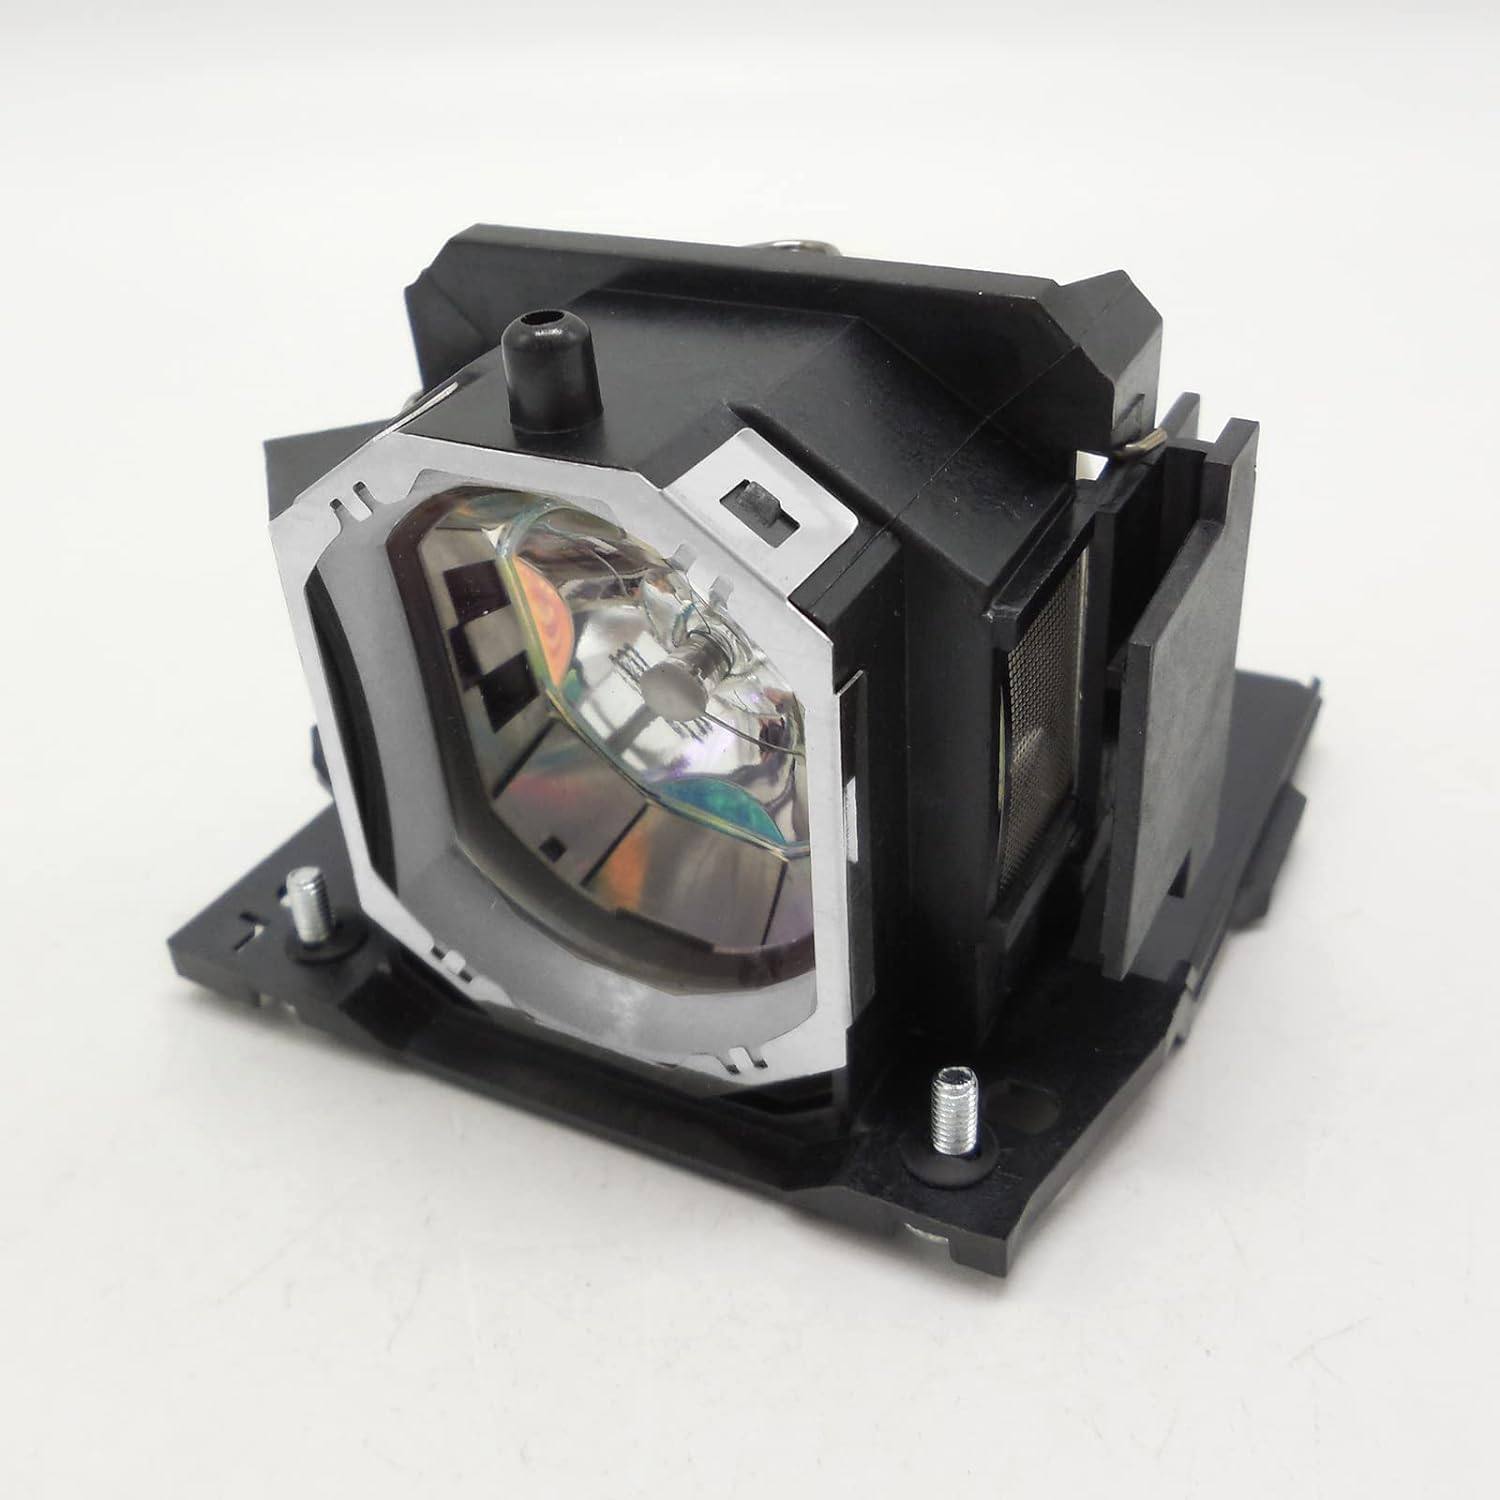 Replacement Projector lamp DT01141 For Hitachi CP-X2020 CP-X2520 CP-X3020